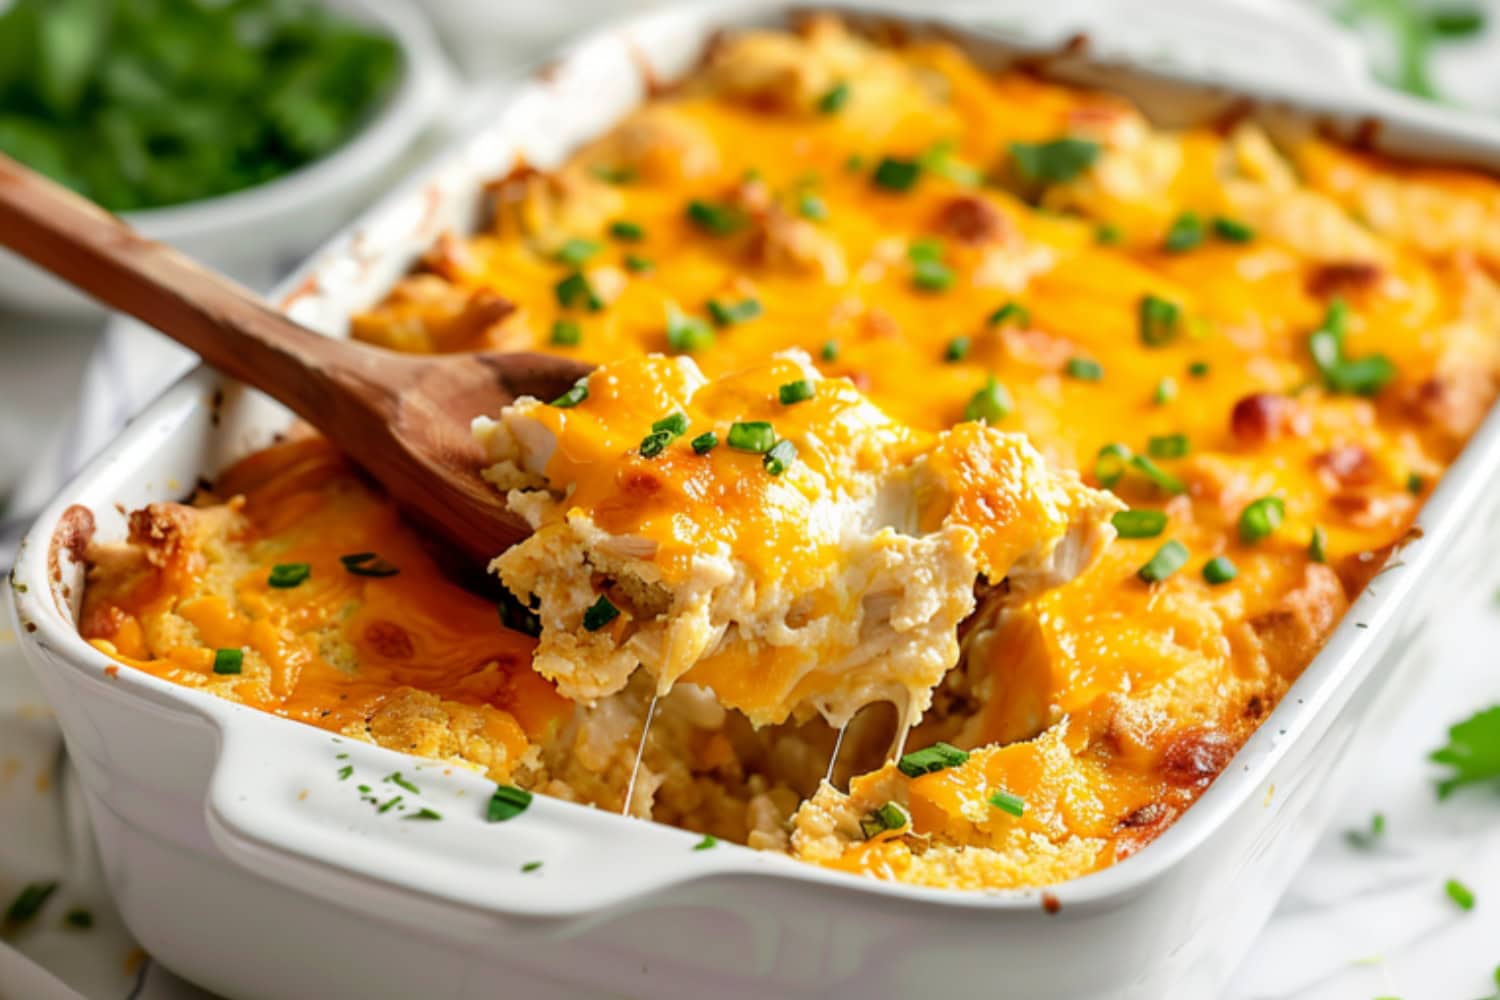 Spoon scooping in a creamy and cheezy casserole.